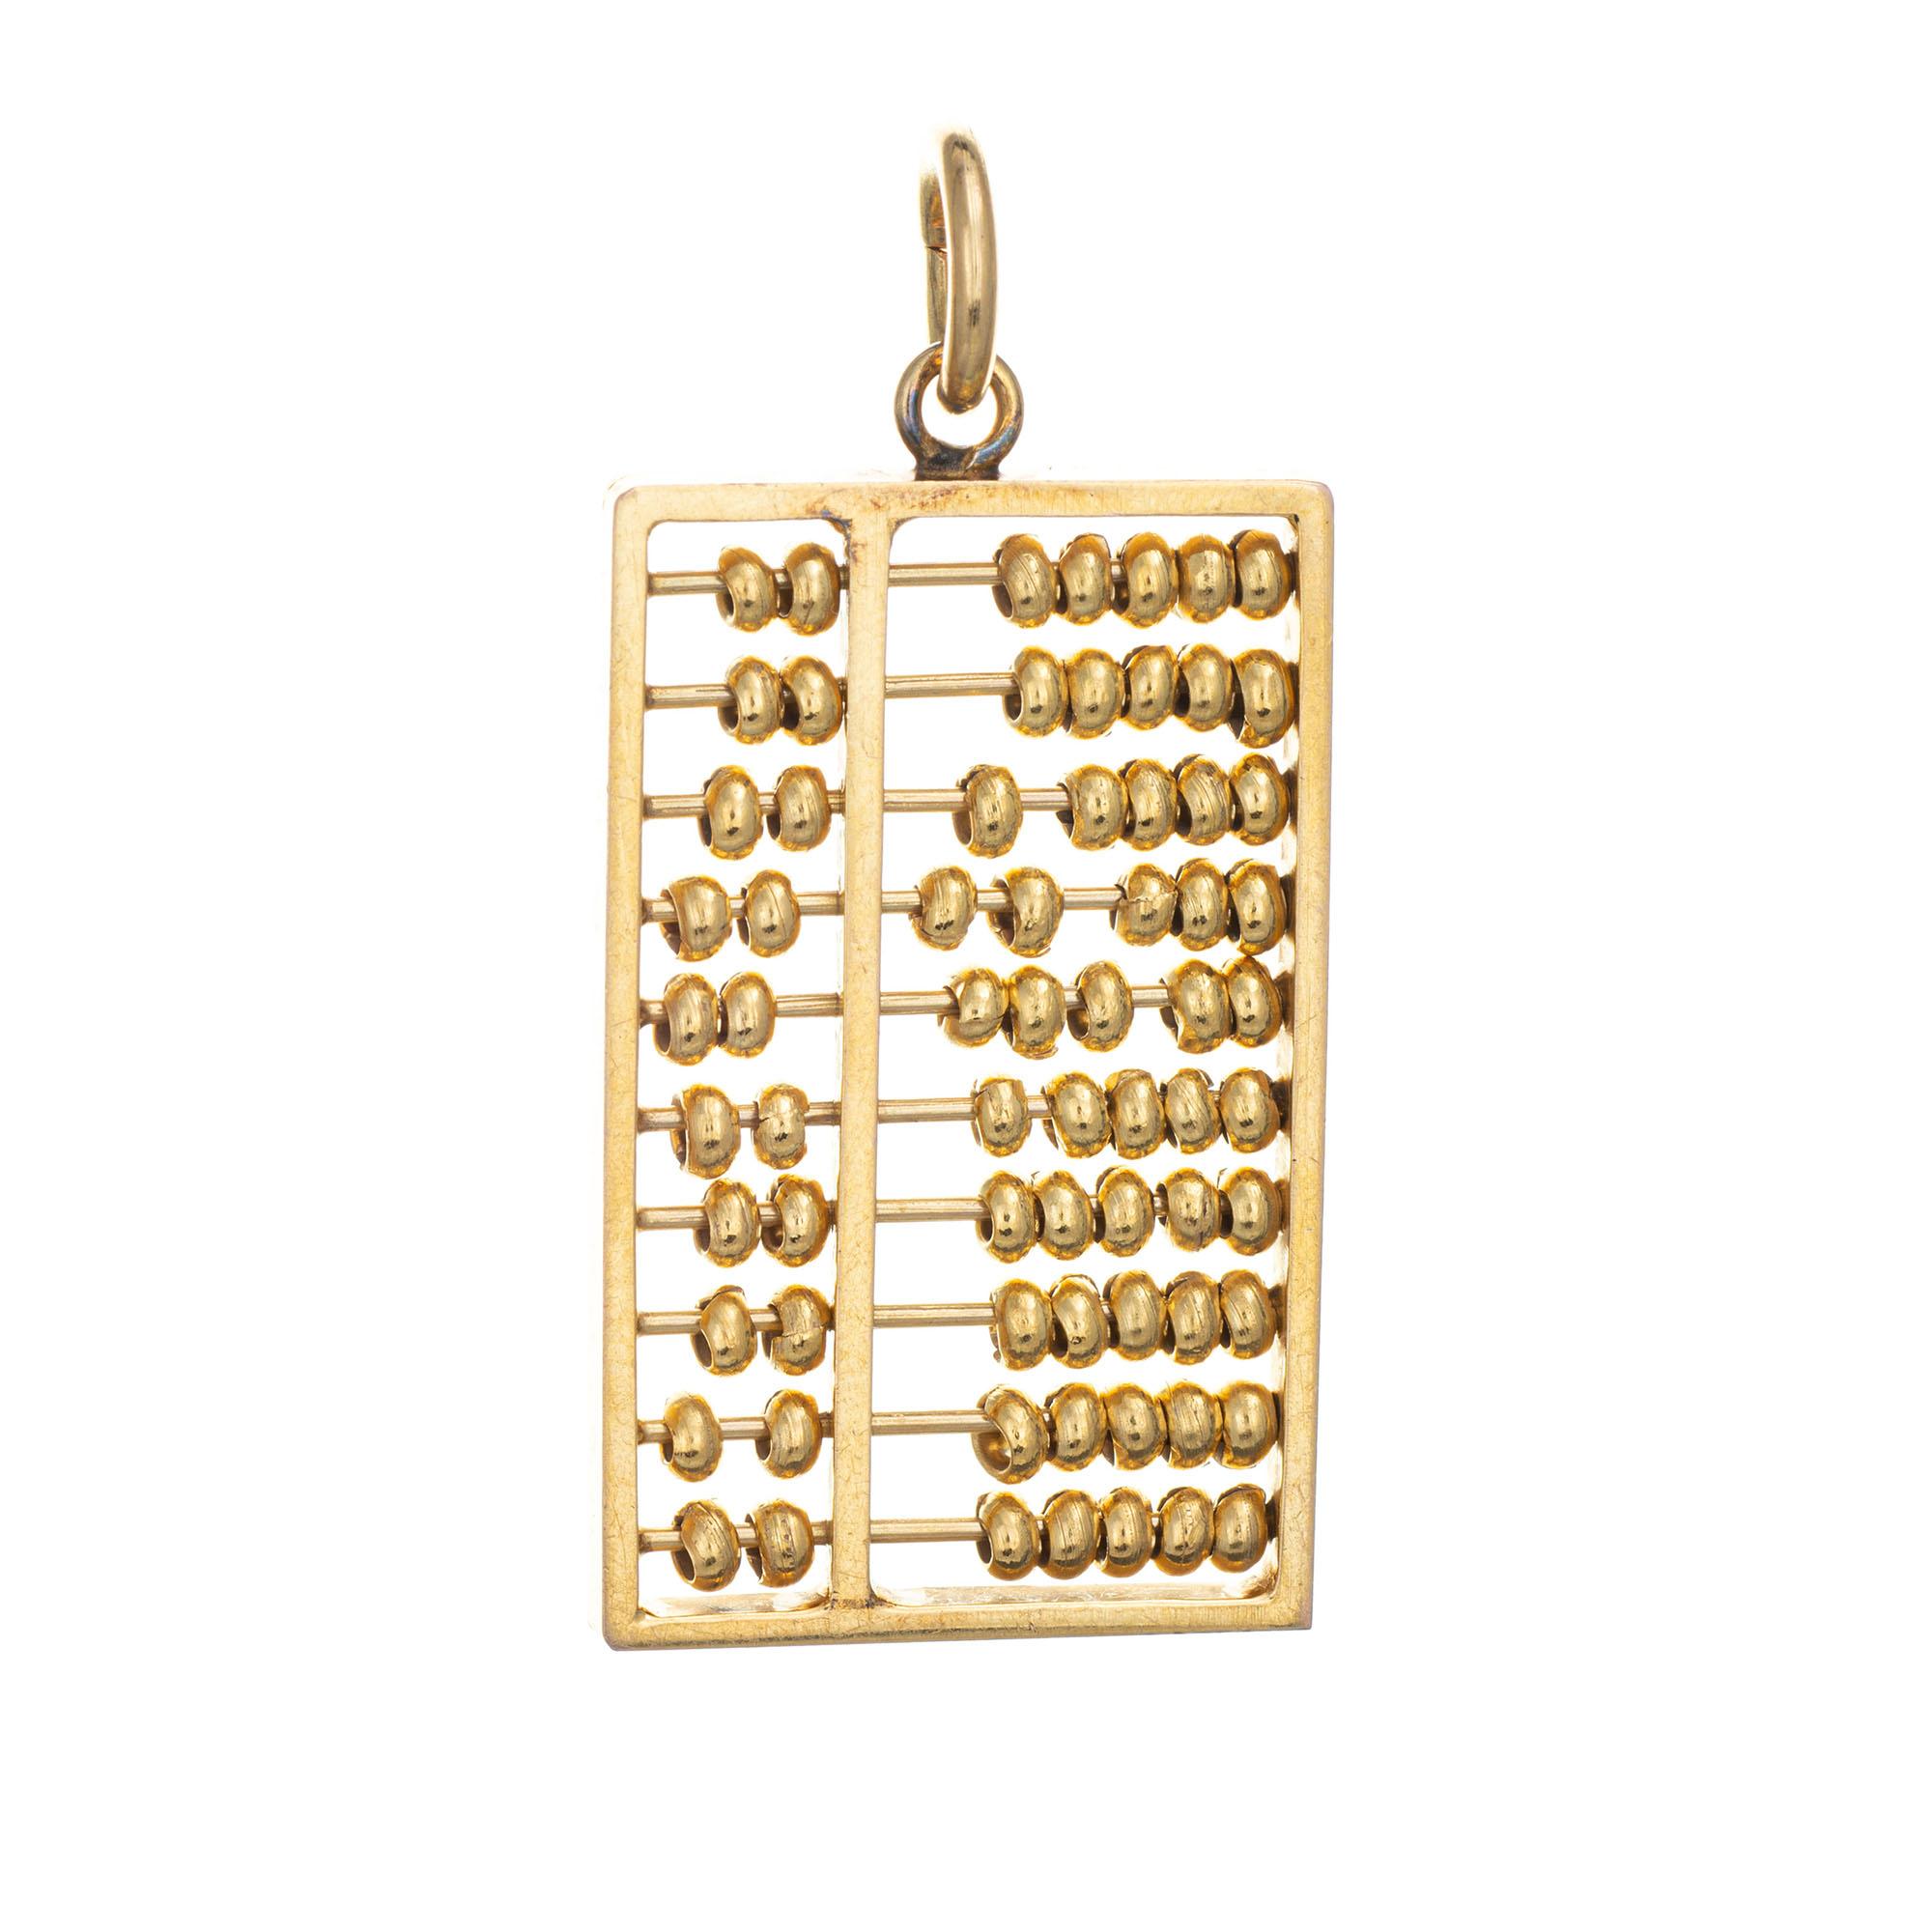 Finely detailed vintage Abacus charm crafted in 14k yellow gold.  

The large abacus features movable beads inside the frame. The charm has a heavy feel and weighs in at 17.1 grams. The piece can be worn as a charm on a bracelet or as a